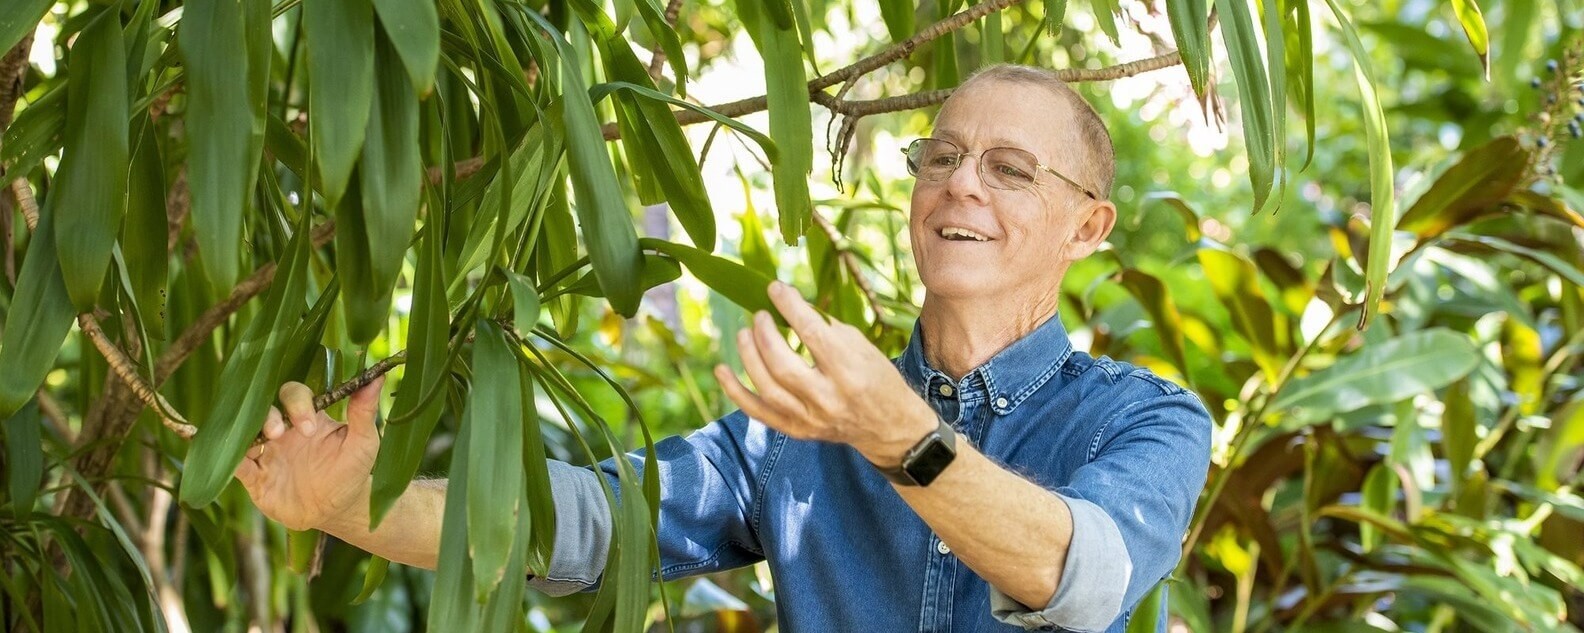 A man smiling and studying the leaf of a large plant